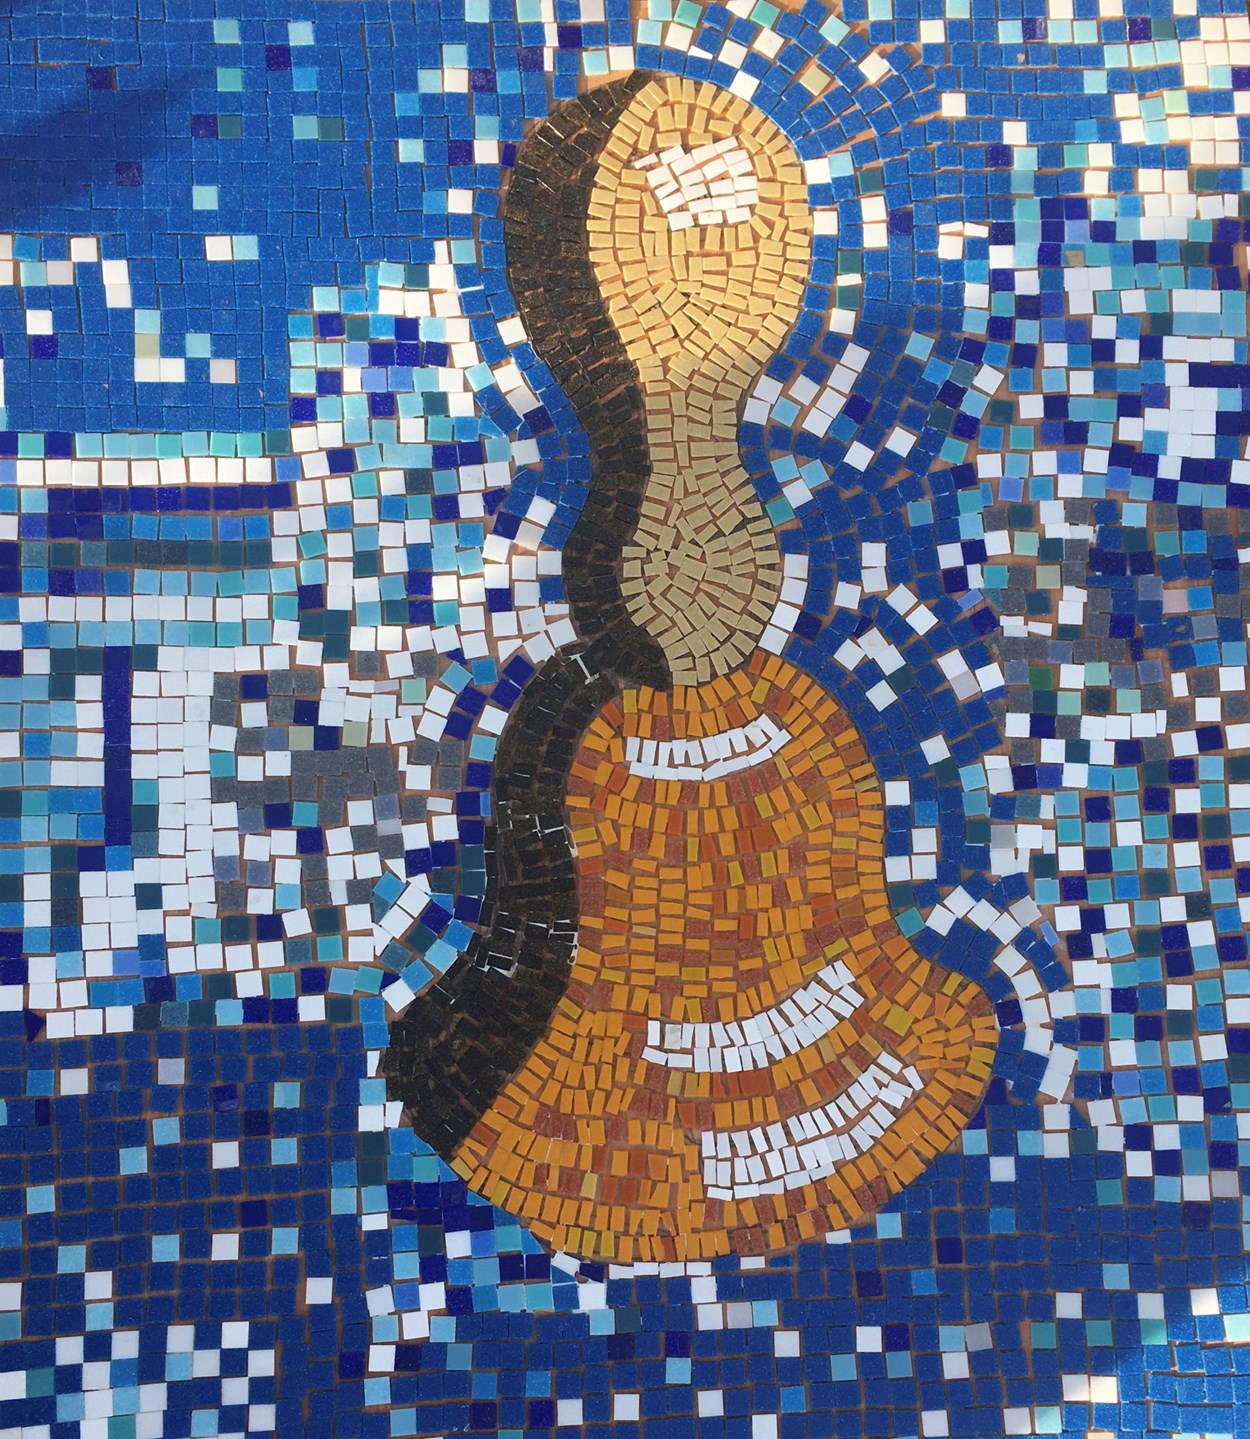 Sounds Good: One of the music-themed mosaics created for a similar project.